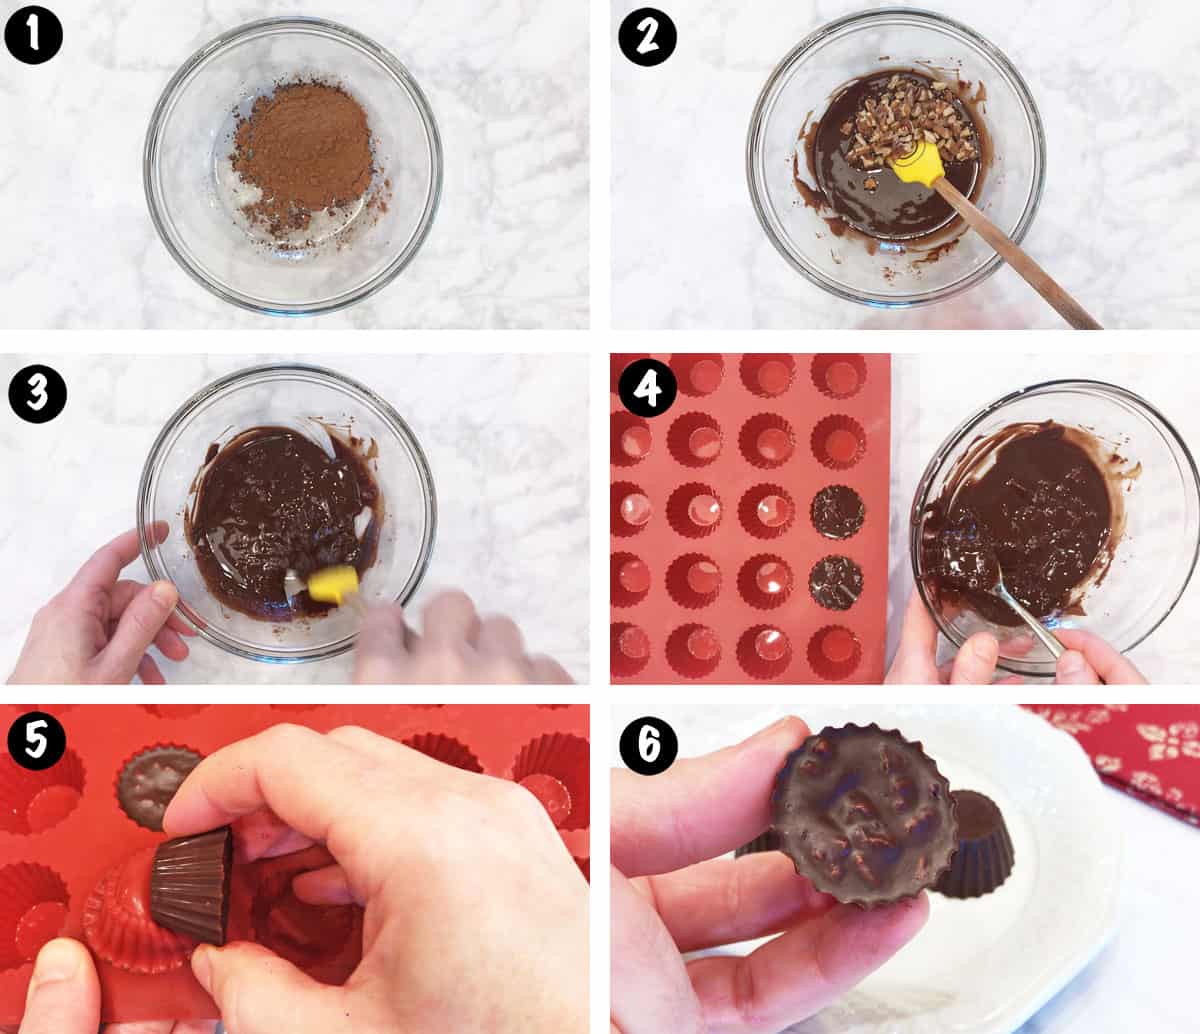 A photo collage showing the steps for making keto chocolate at home. 